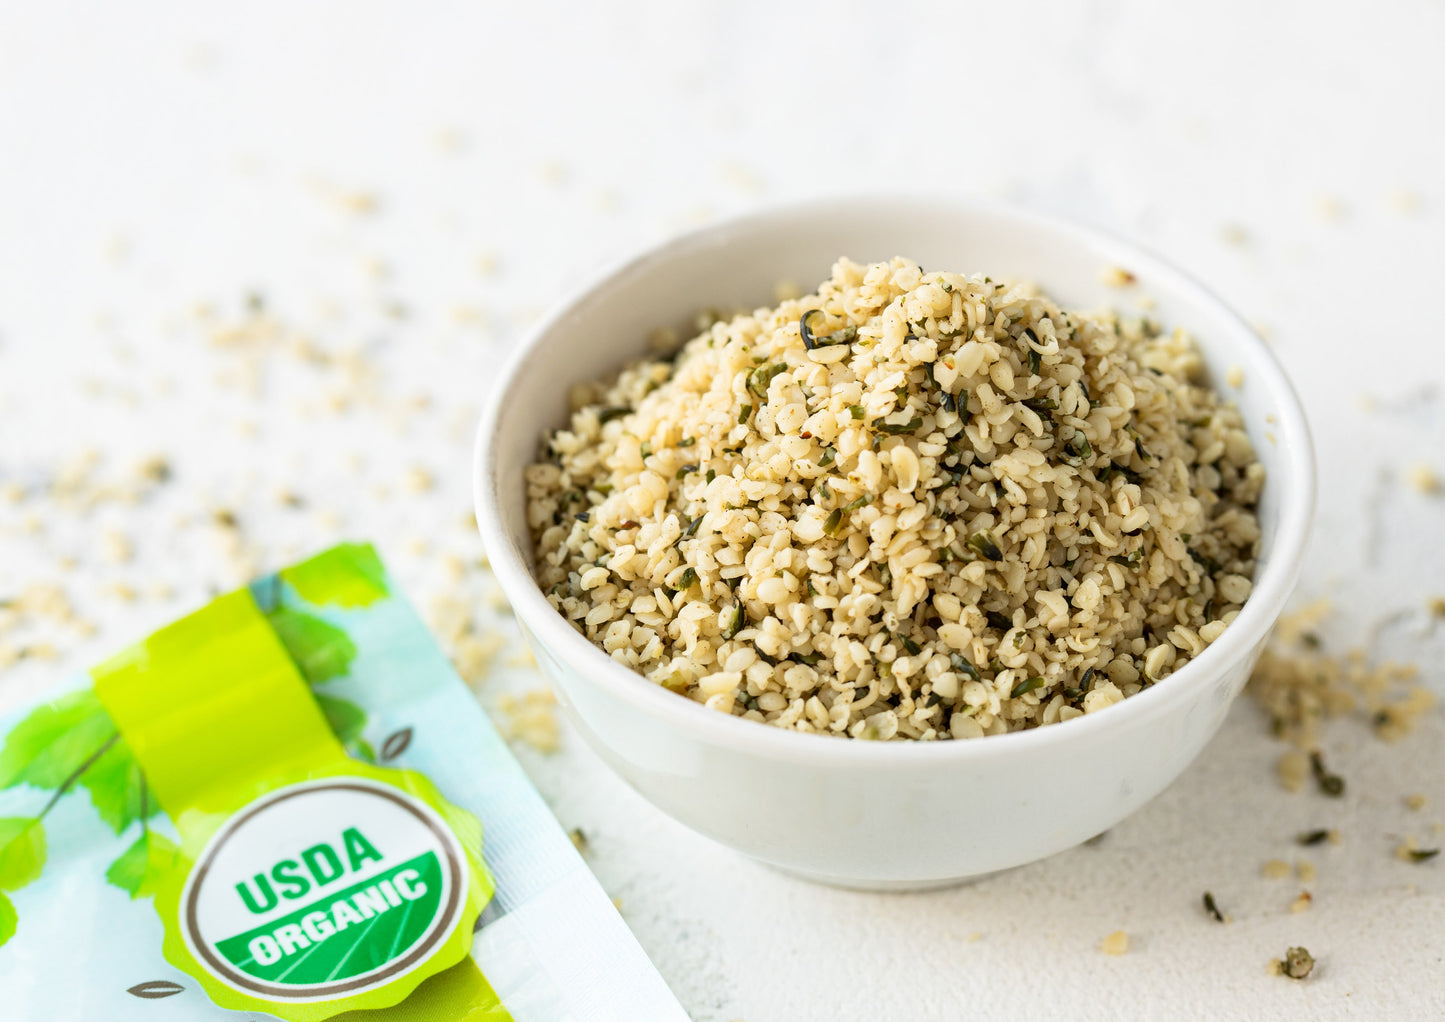 Organic Paraguayan Hemp Seeds – Non-GMO Raw Hearts, Hulled, Kosher, Vegan, Bulk. Keto-Friendly. Rich in Omega 3 & 6. Good Source of Protein. Great for Smoothies, Oatmeal, and Salads